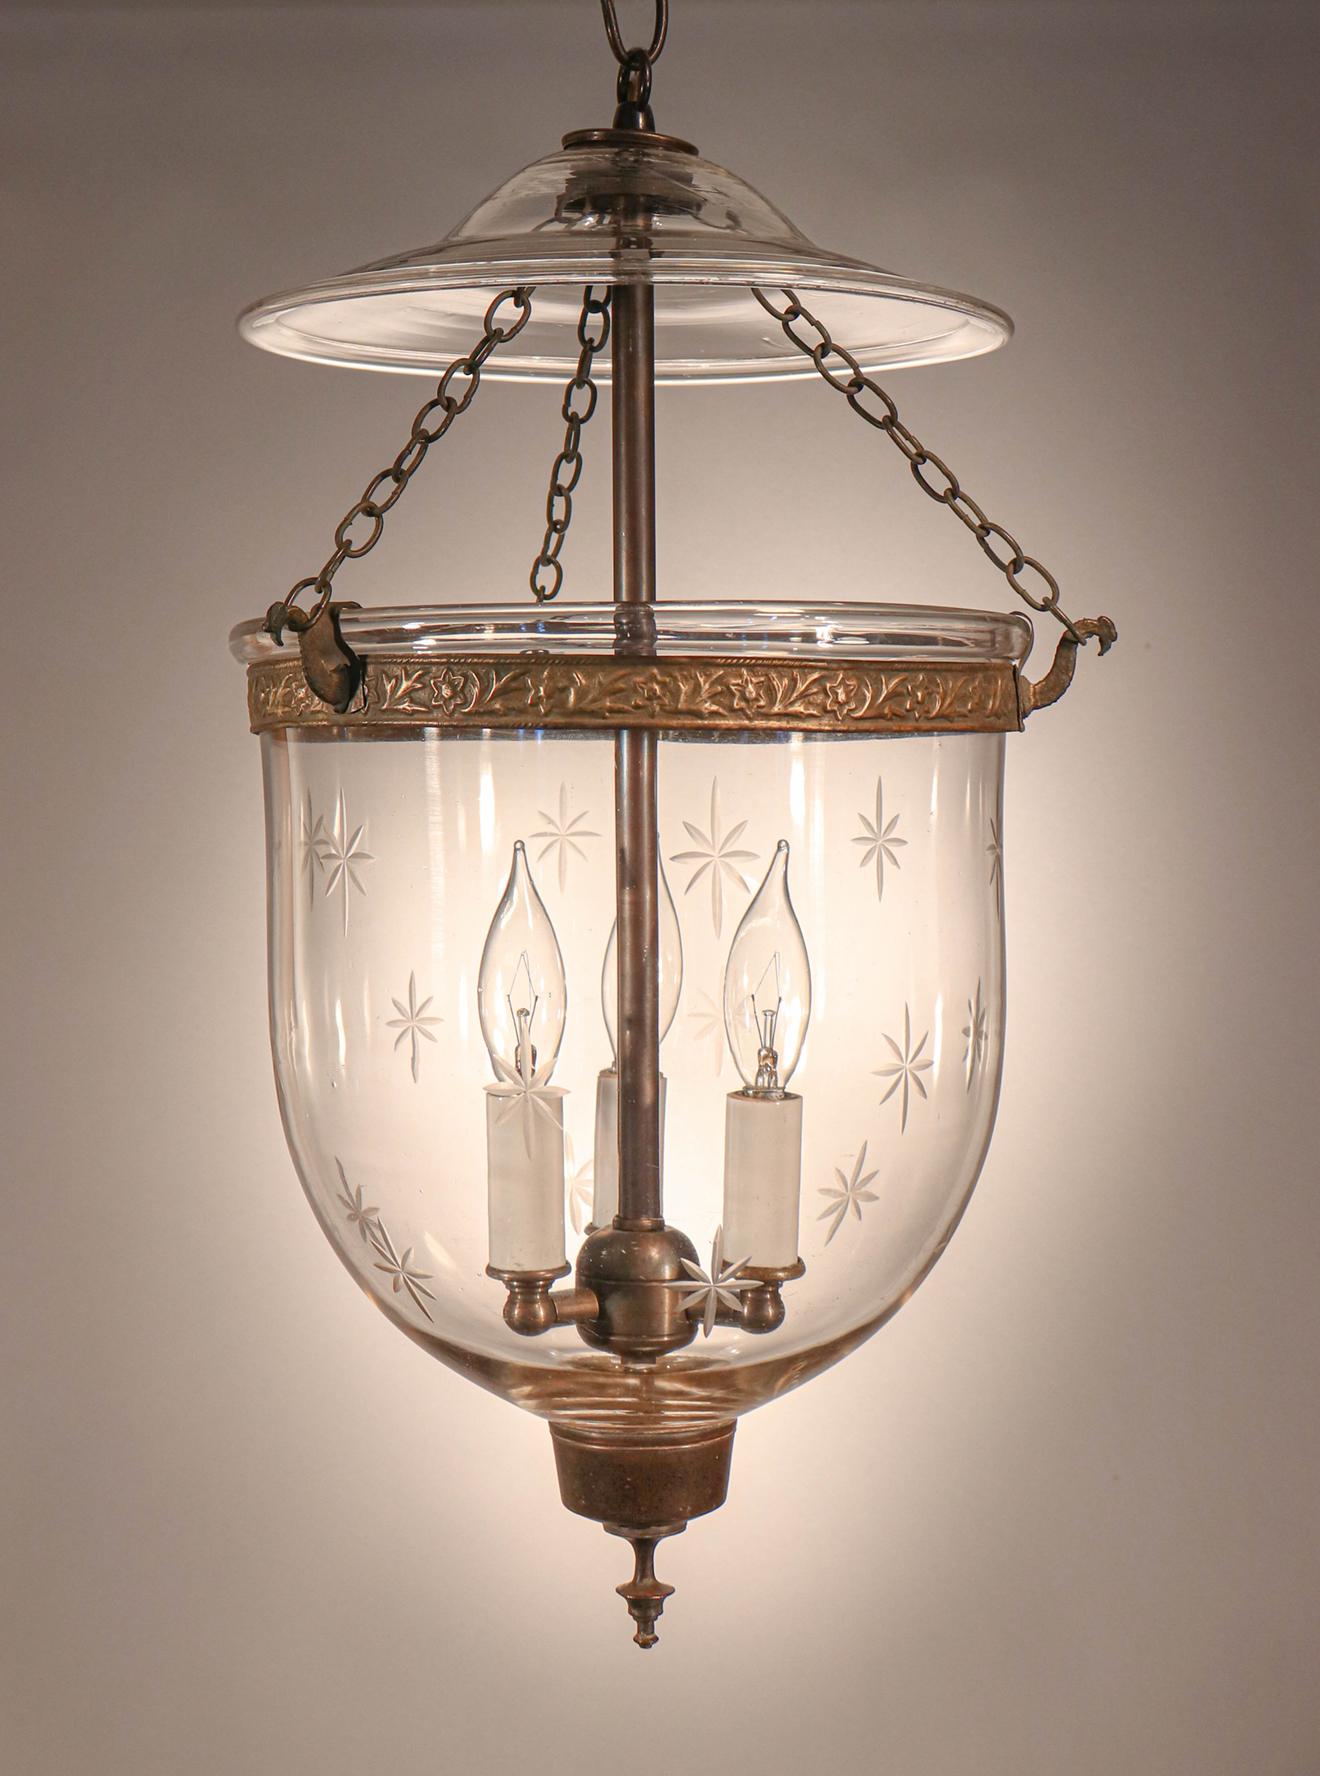 This circa 1870 hand blown glass bell jar lantern has lovely form accentuated by a finely etched star motif. It features all original brass fittings, including the embossed brass band and finial/candleholder base. The pendant light has been newly